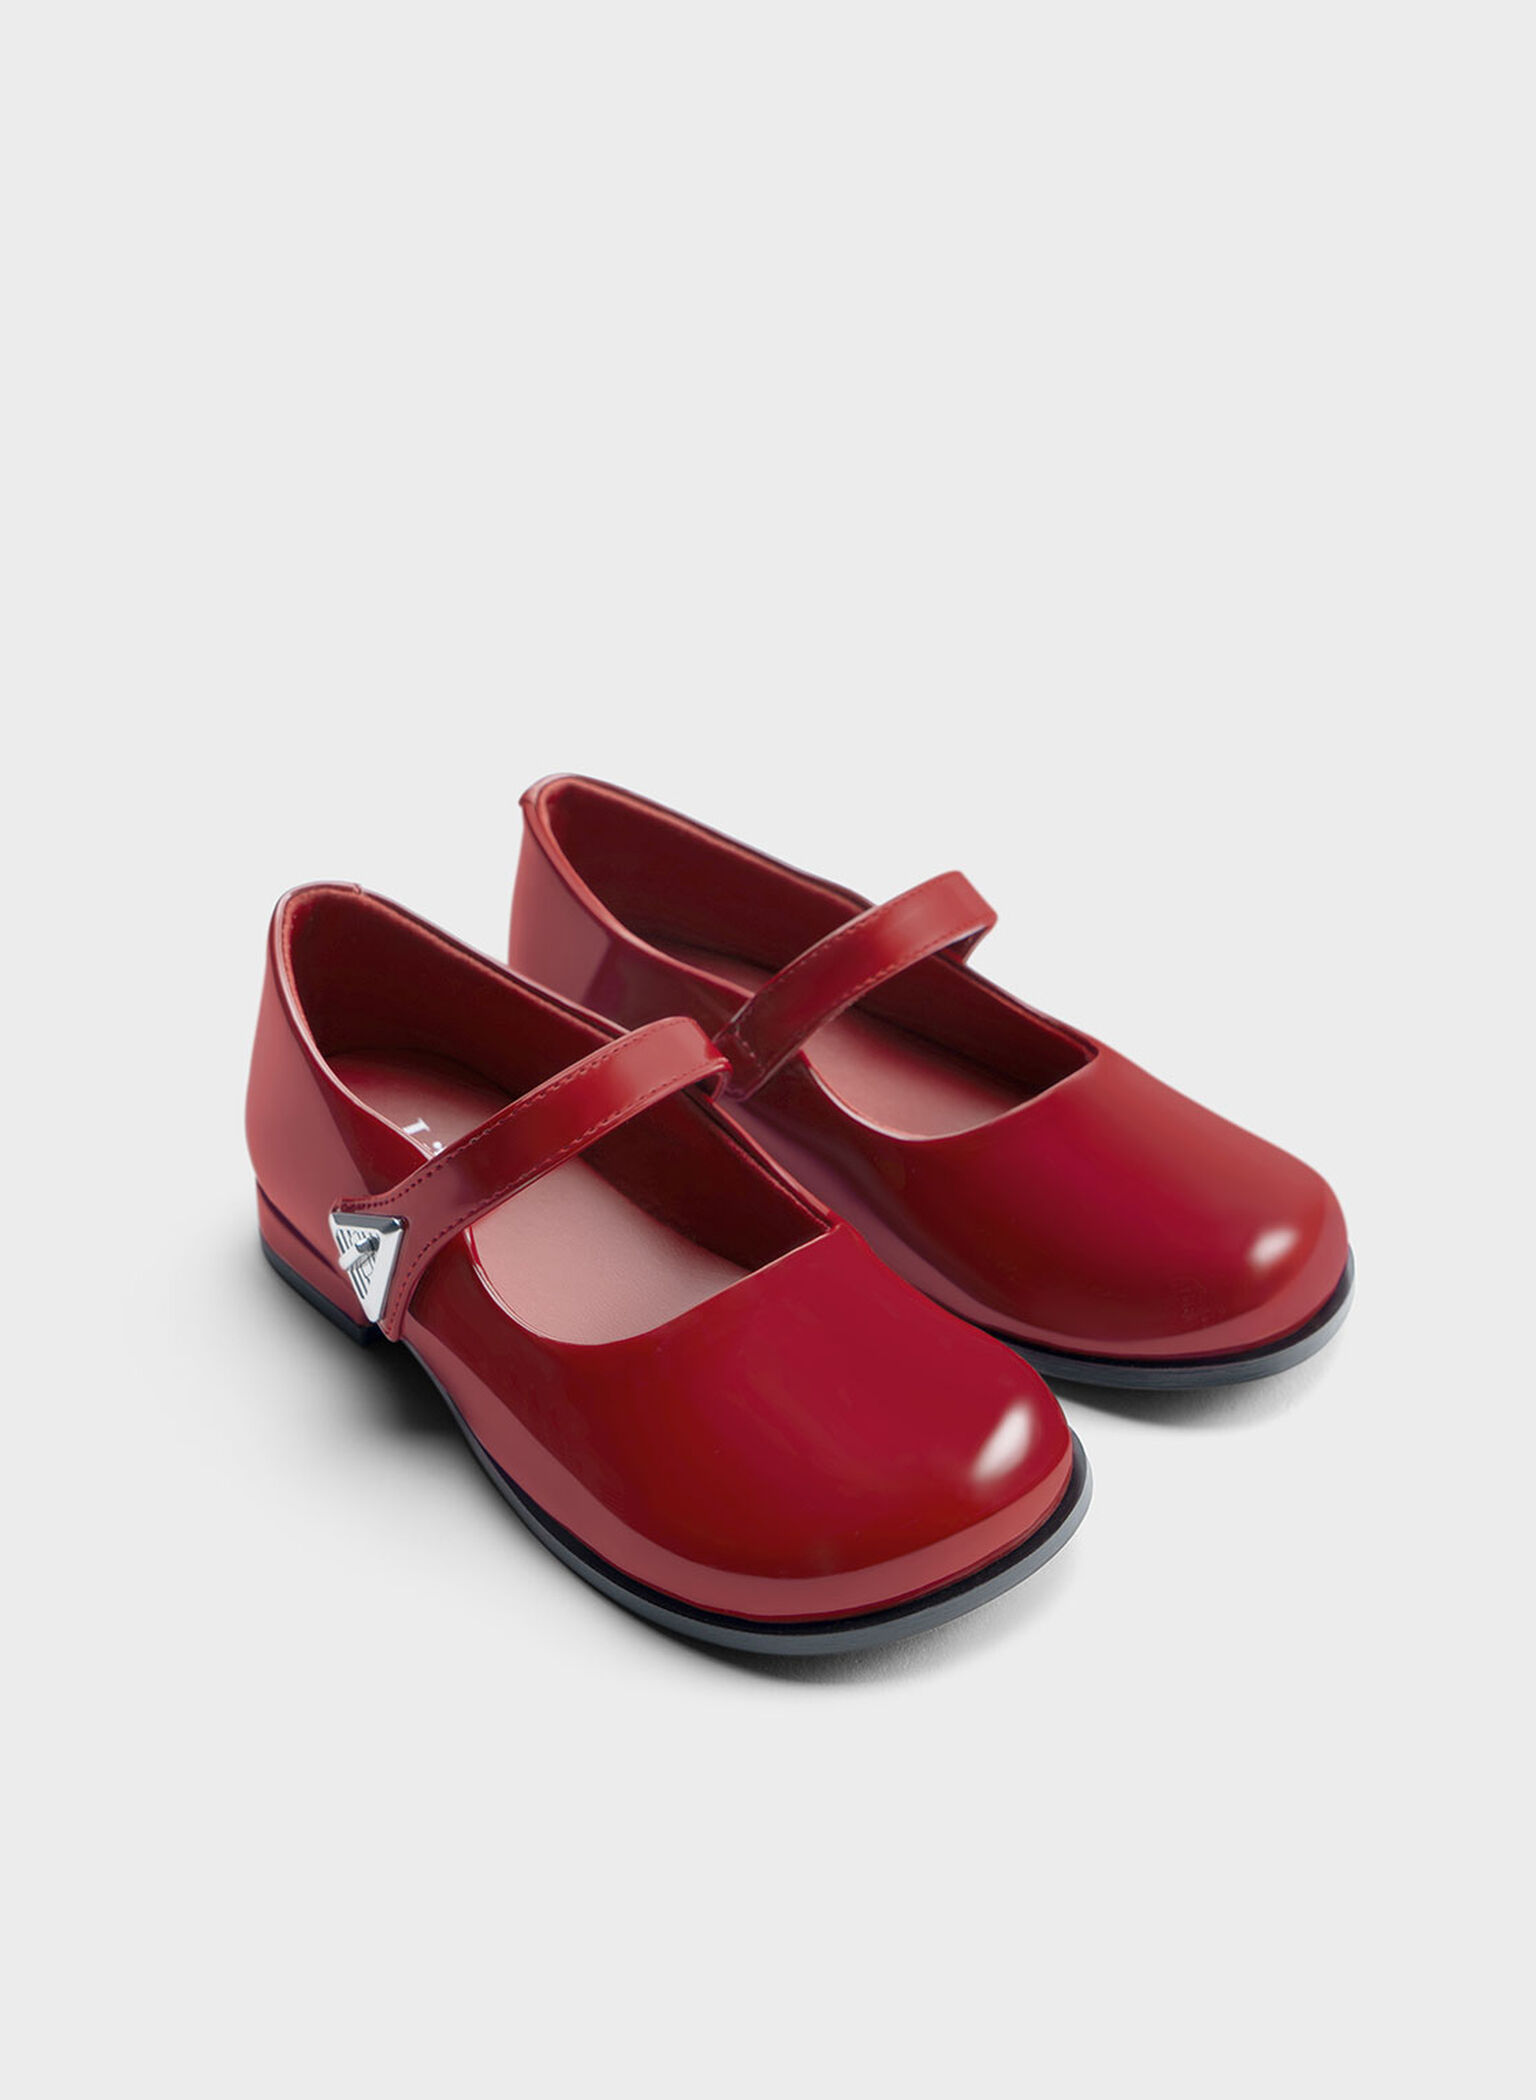 Girls' Trice Patent Metallic Accent Mary Janes, Red, hi-res